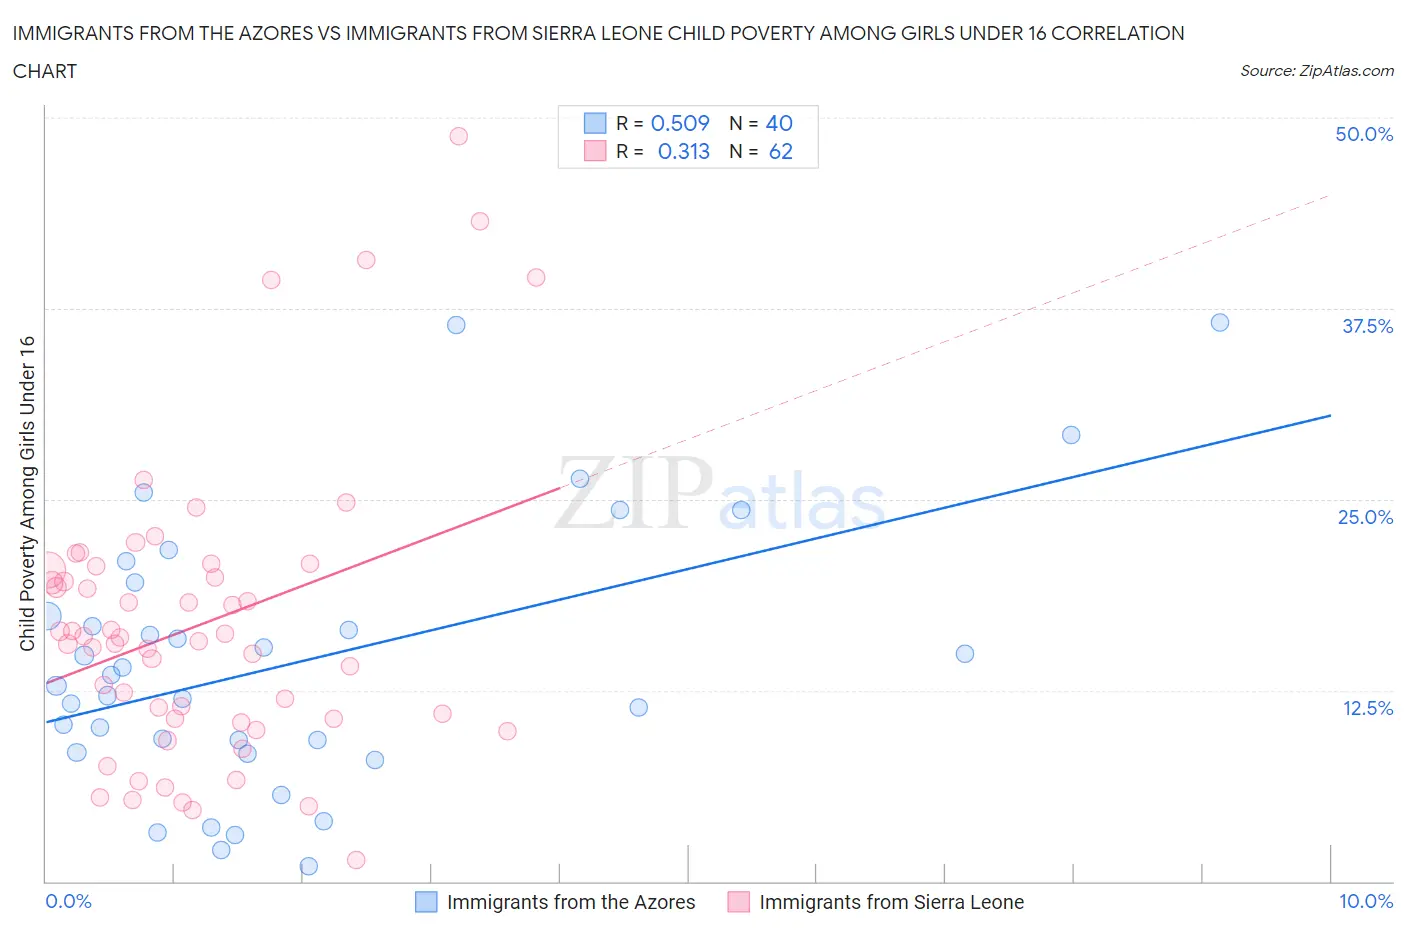 Immigrants from the Azores vs Immigrants from Sierra Leone Child Poverty Among Girls Under 16